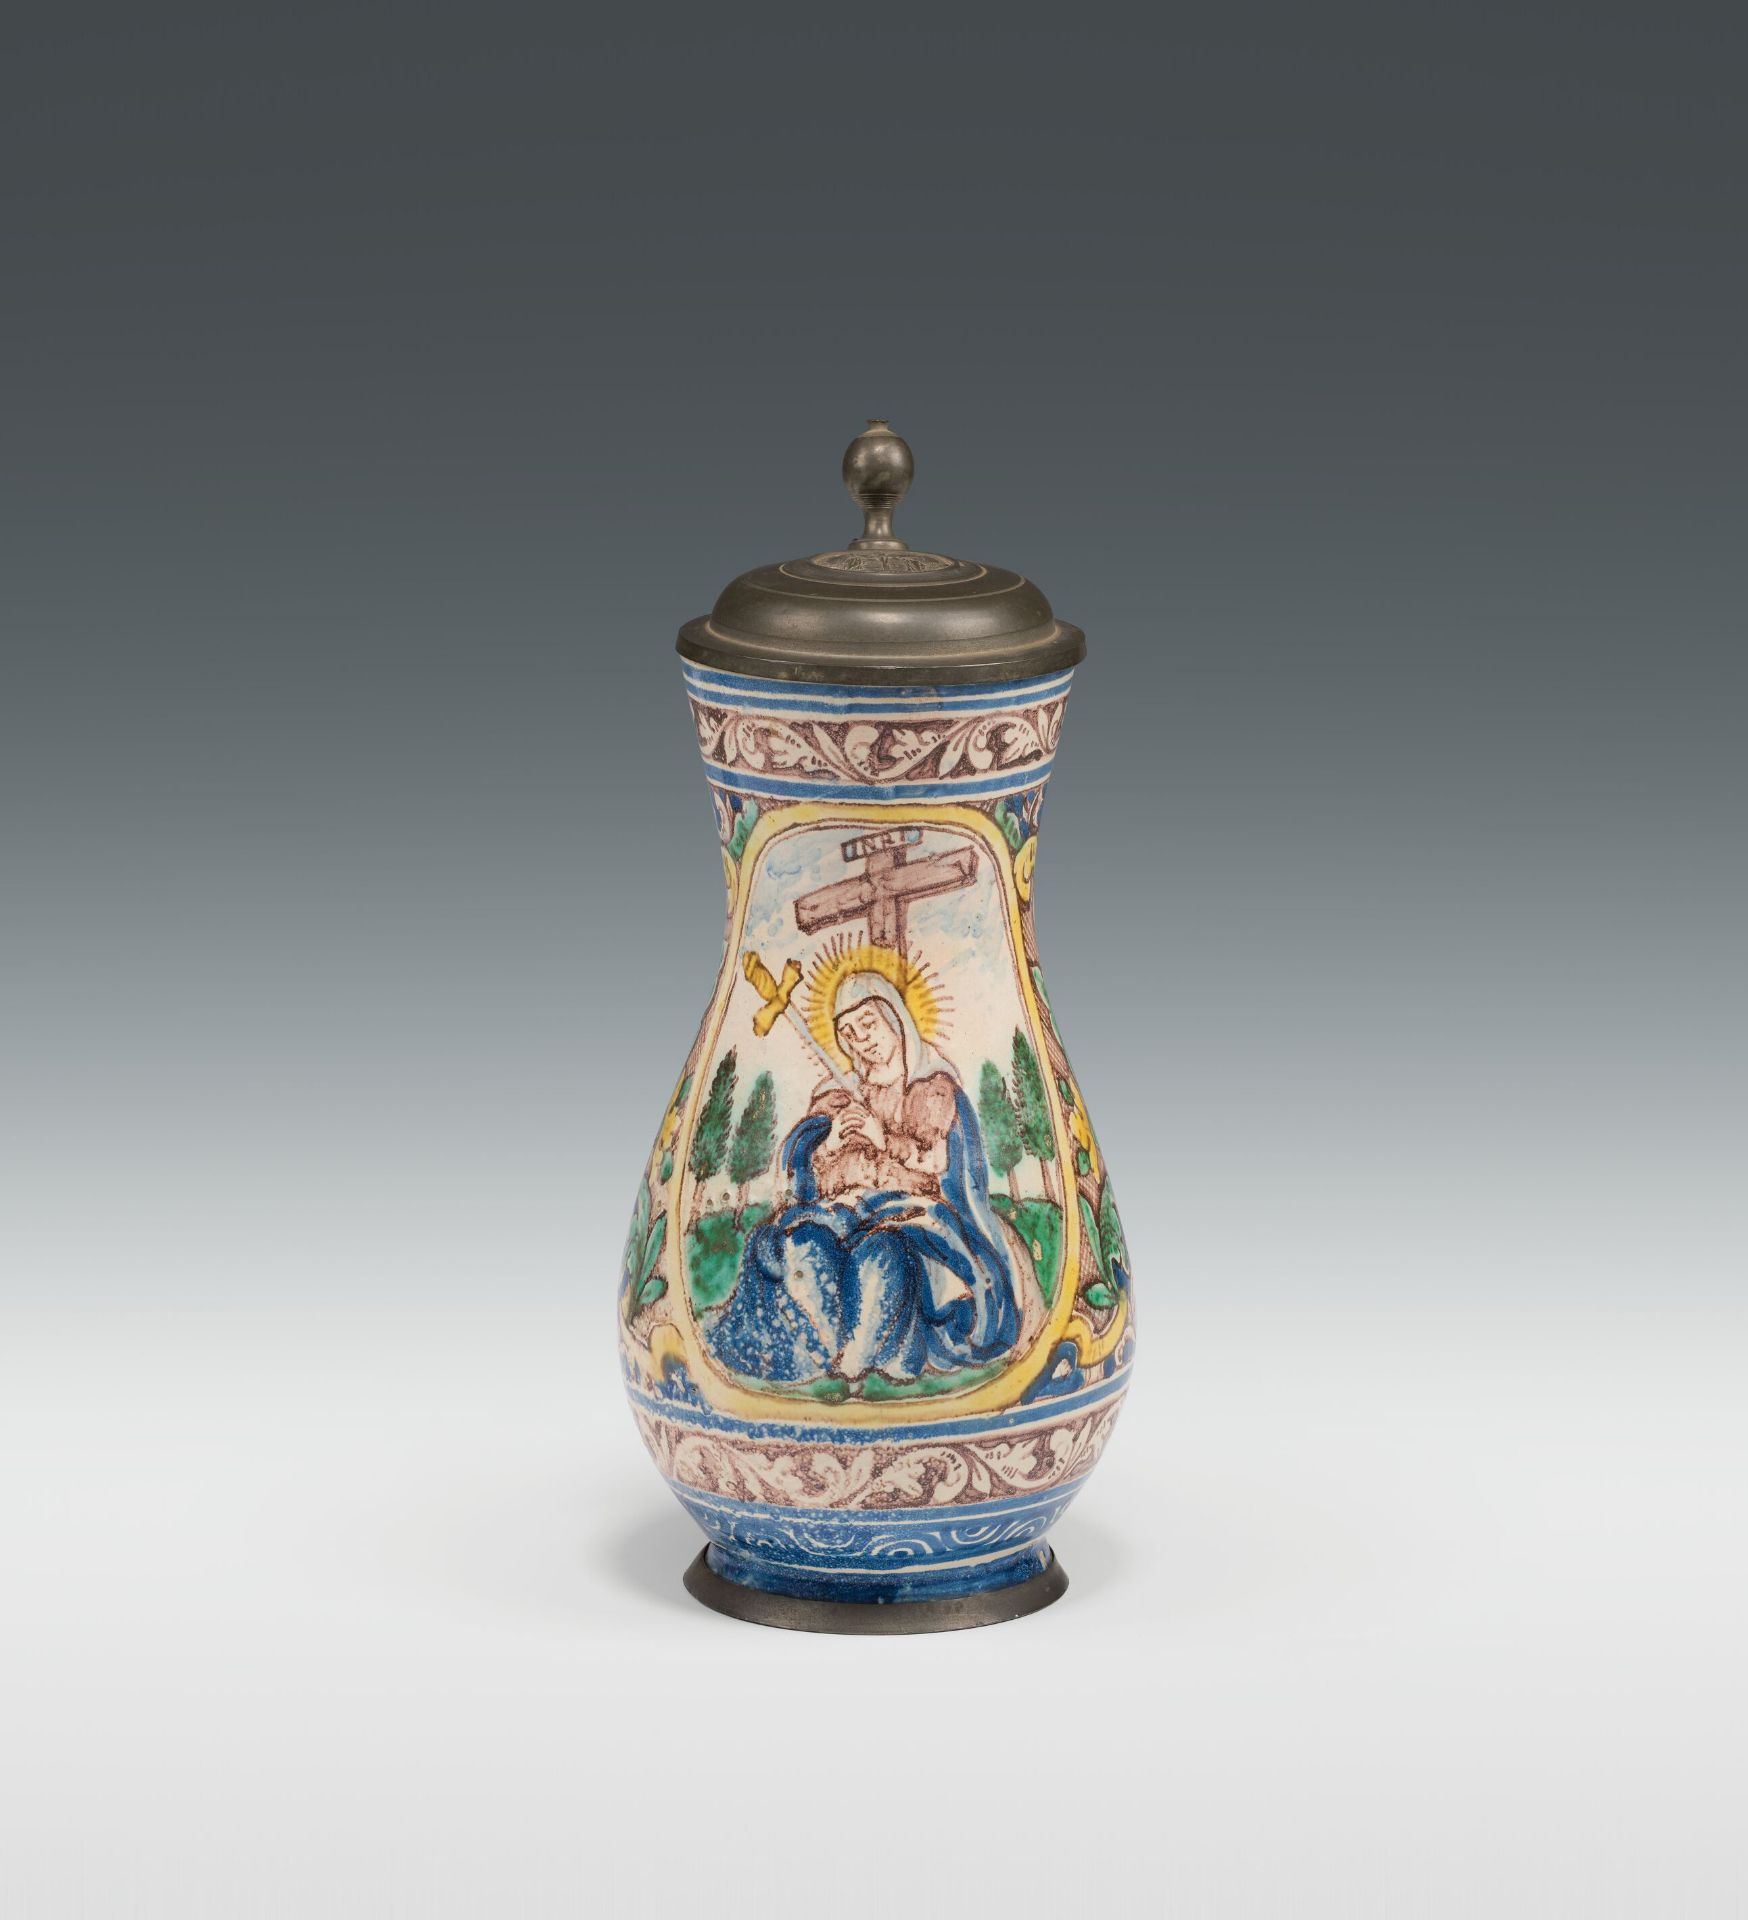 JugGmunden, dated 1754ceramics, light shard, colourfully painted and glazed; pewter base and lid;